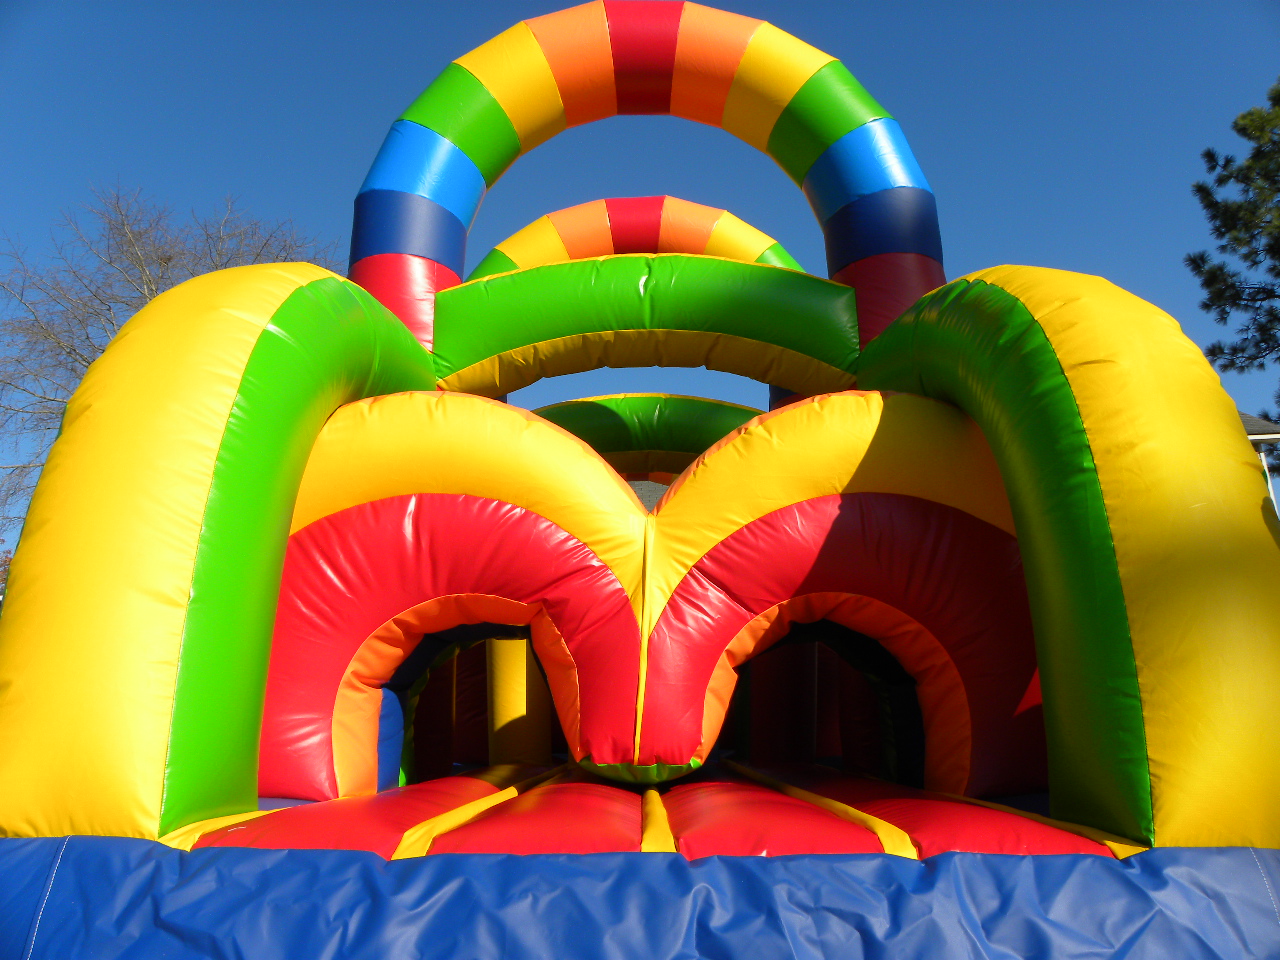 Rental Item of the Week: Inflatable Obstacle Course